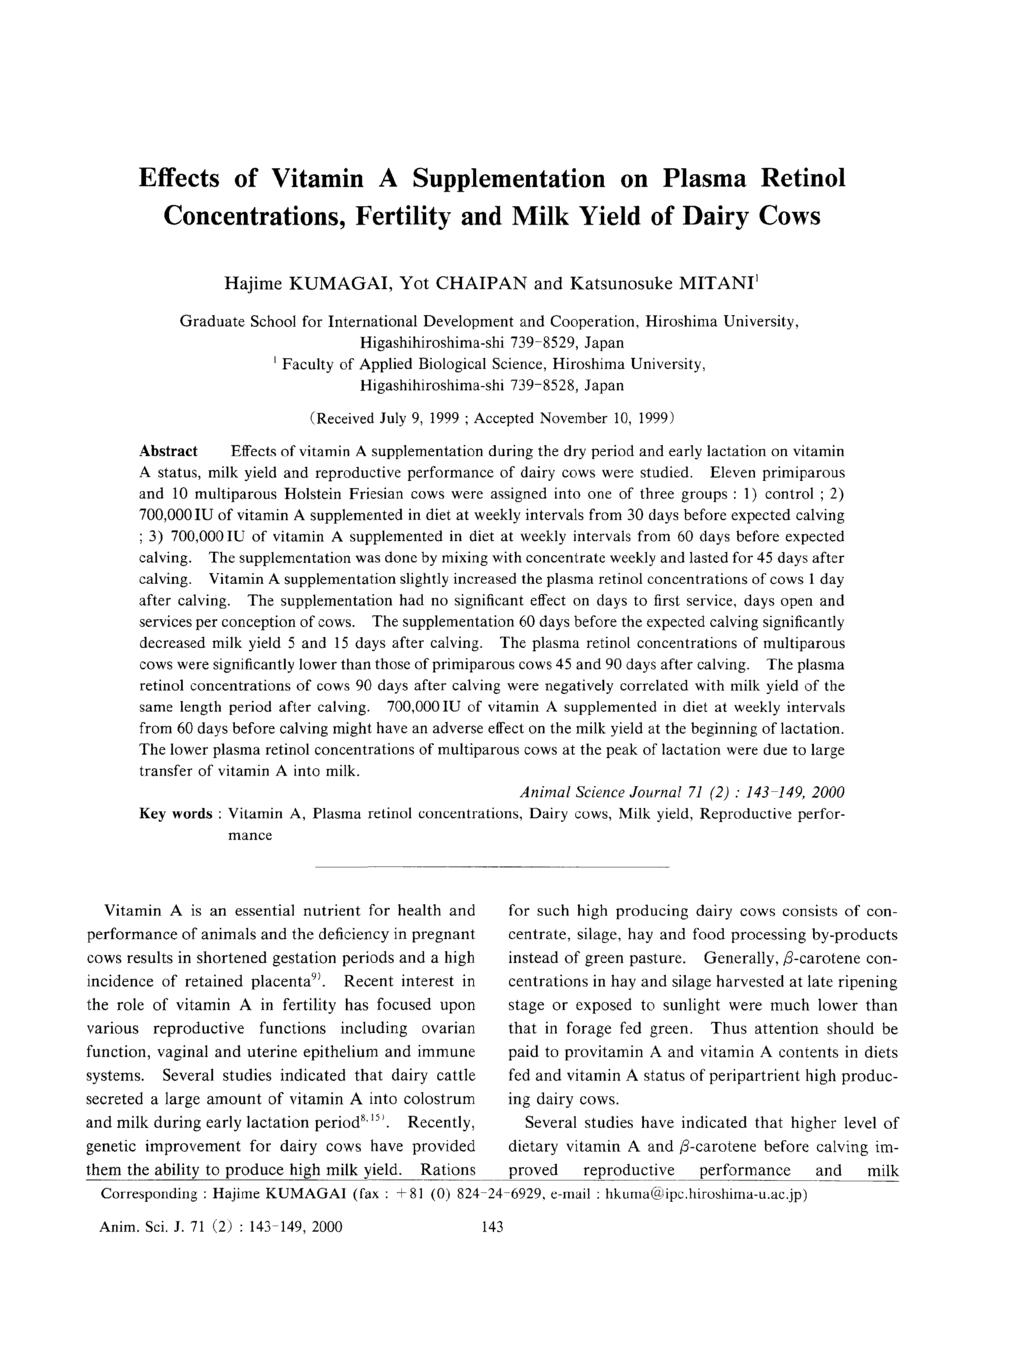 Effects of Vitamin A Supplementation on Plasma Retinol Concentrations, Fertility and Milk Yield of Dairy Cows Graduate School for International Development and Cooperation, Hiroshima University,